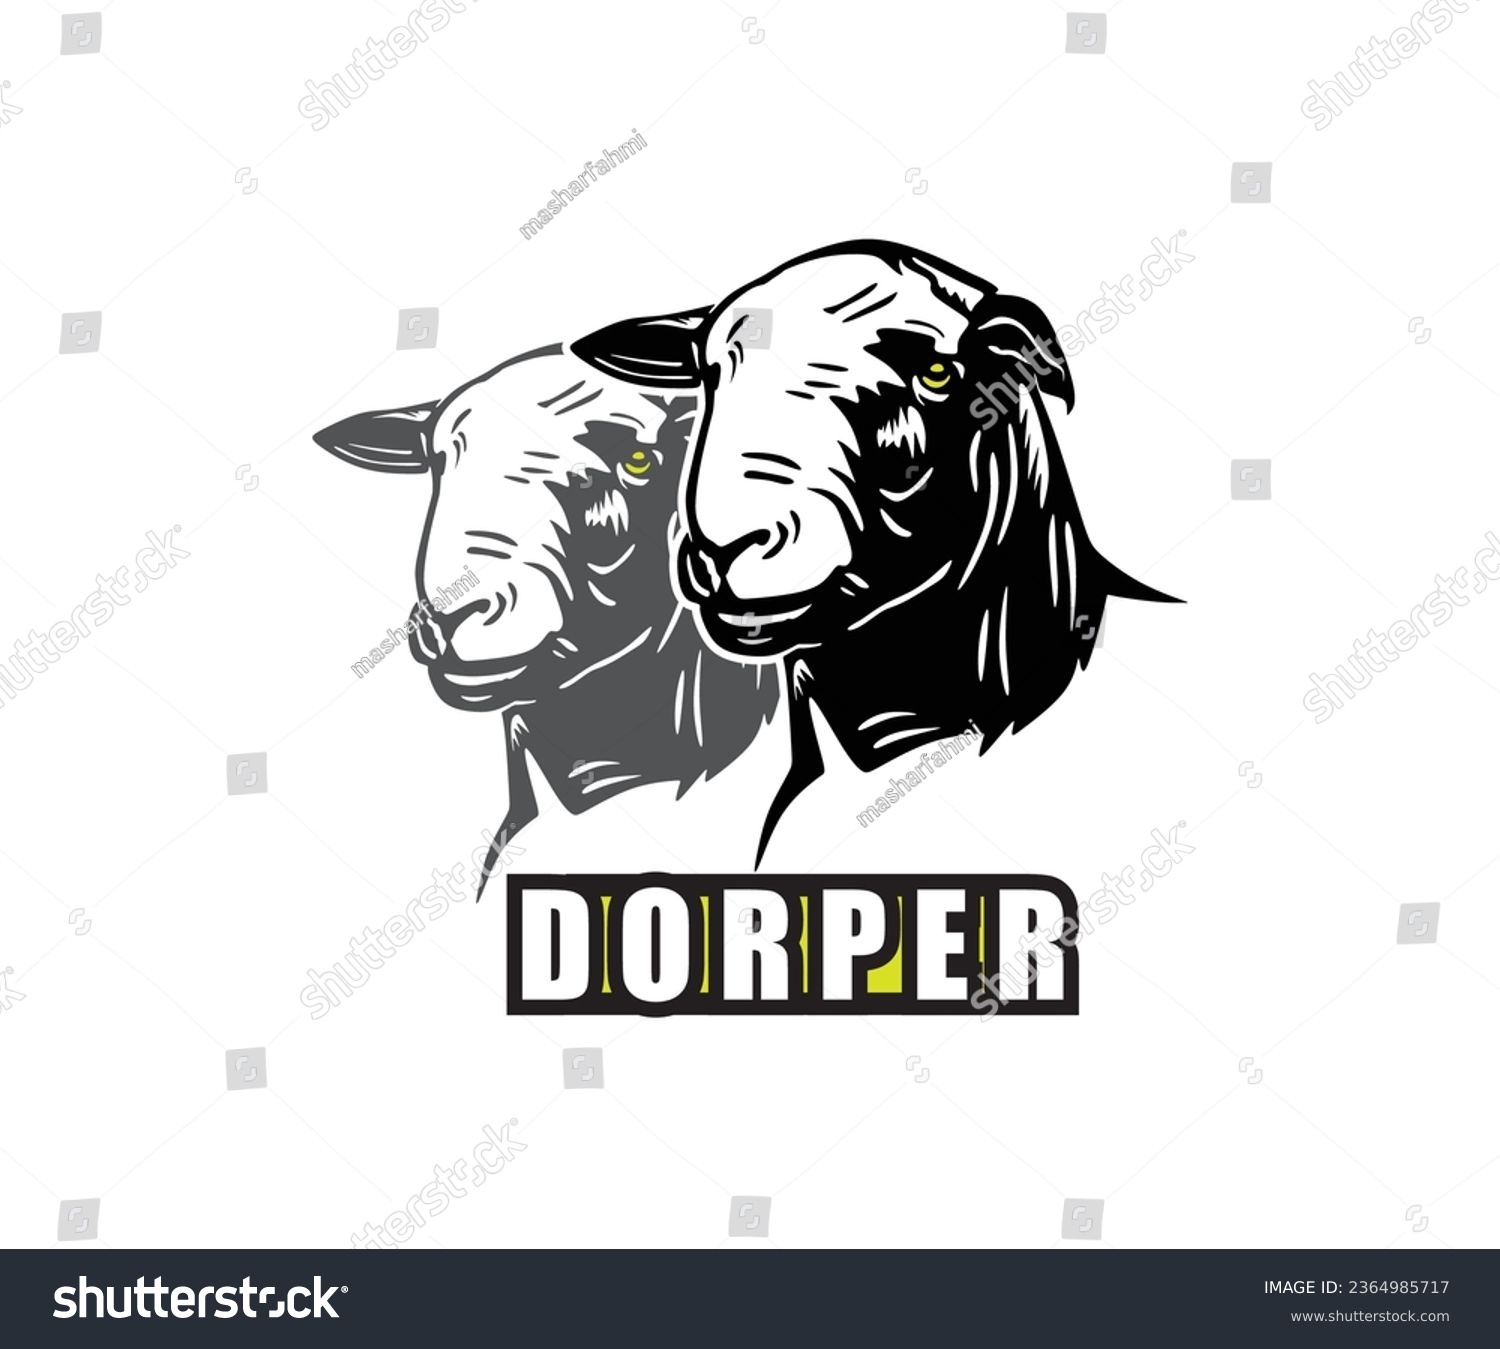 SVG of GREAT DORPER SHEEP HEAD LOGO, silhouette of strong sheep face vector illustrations. svg